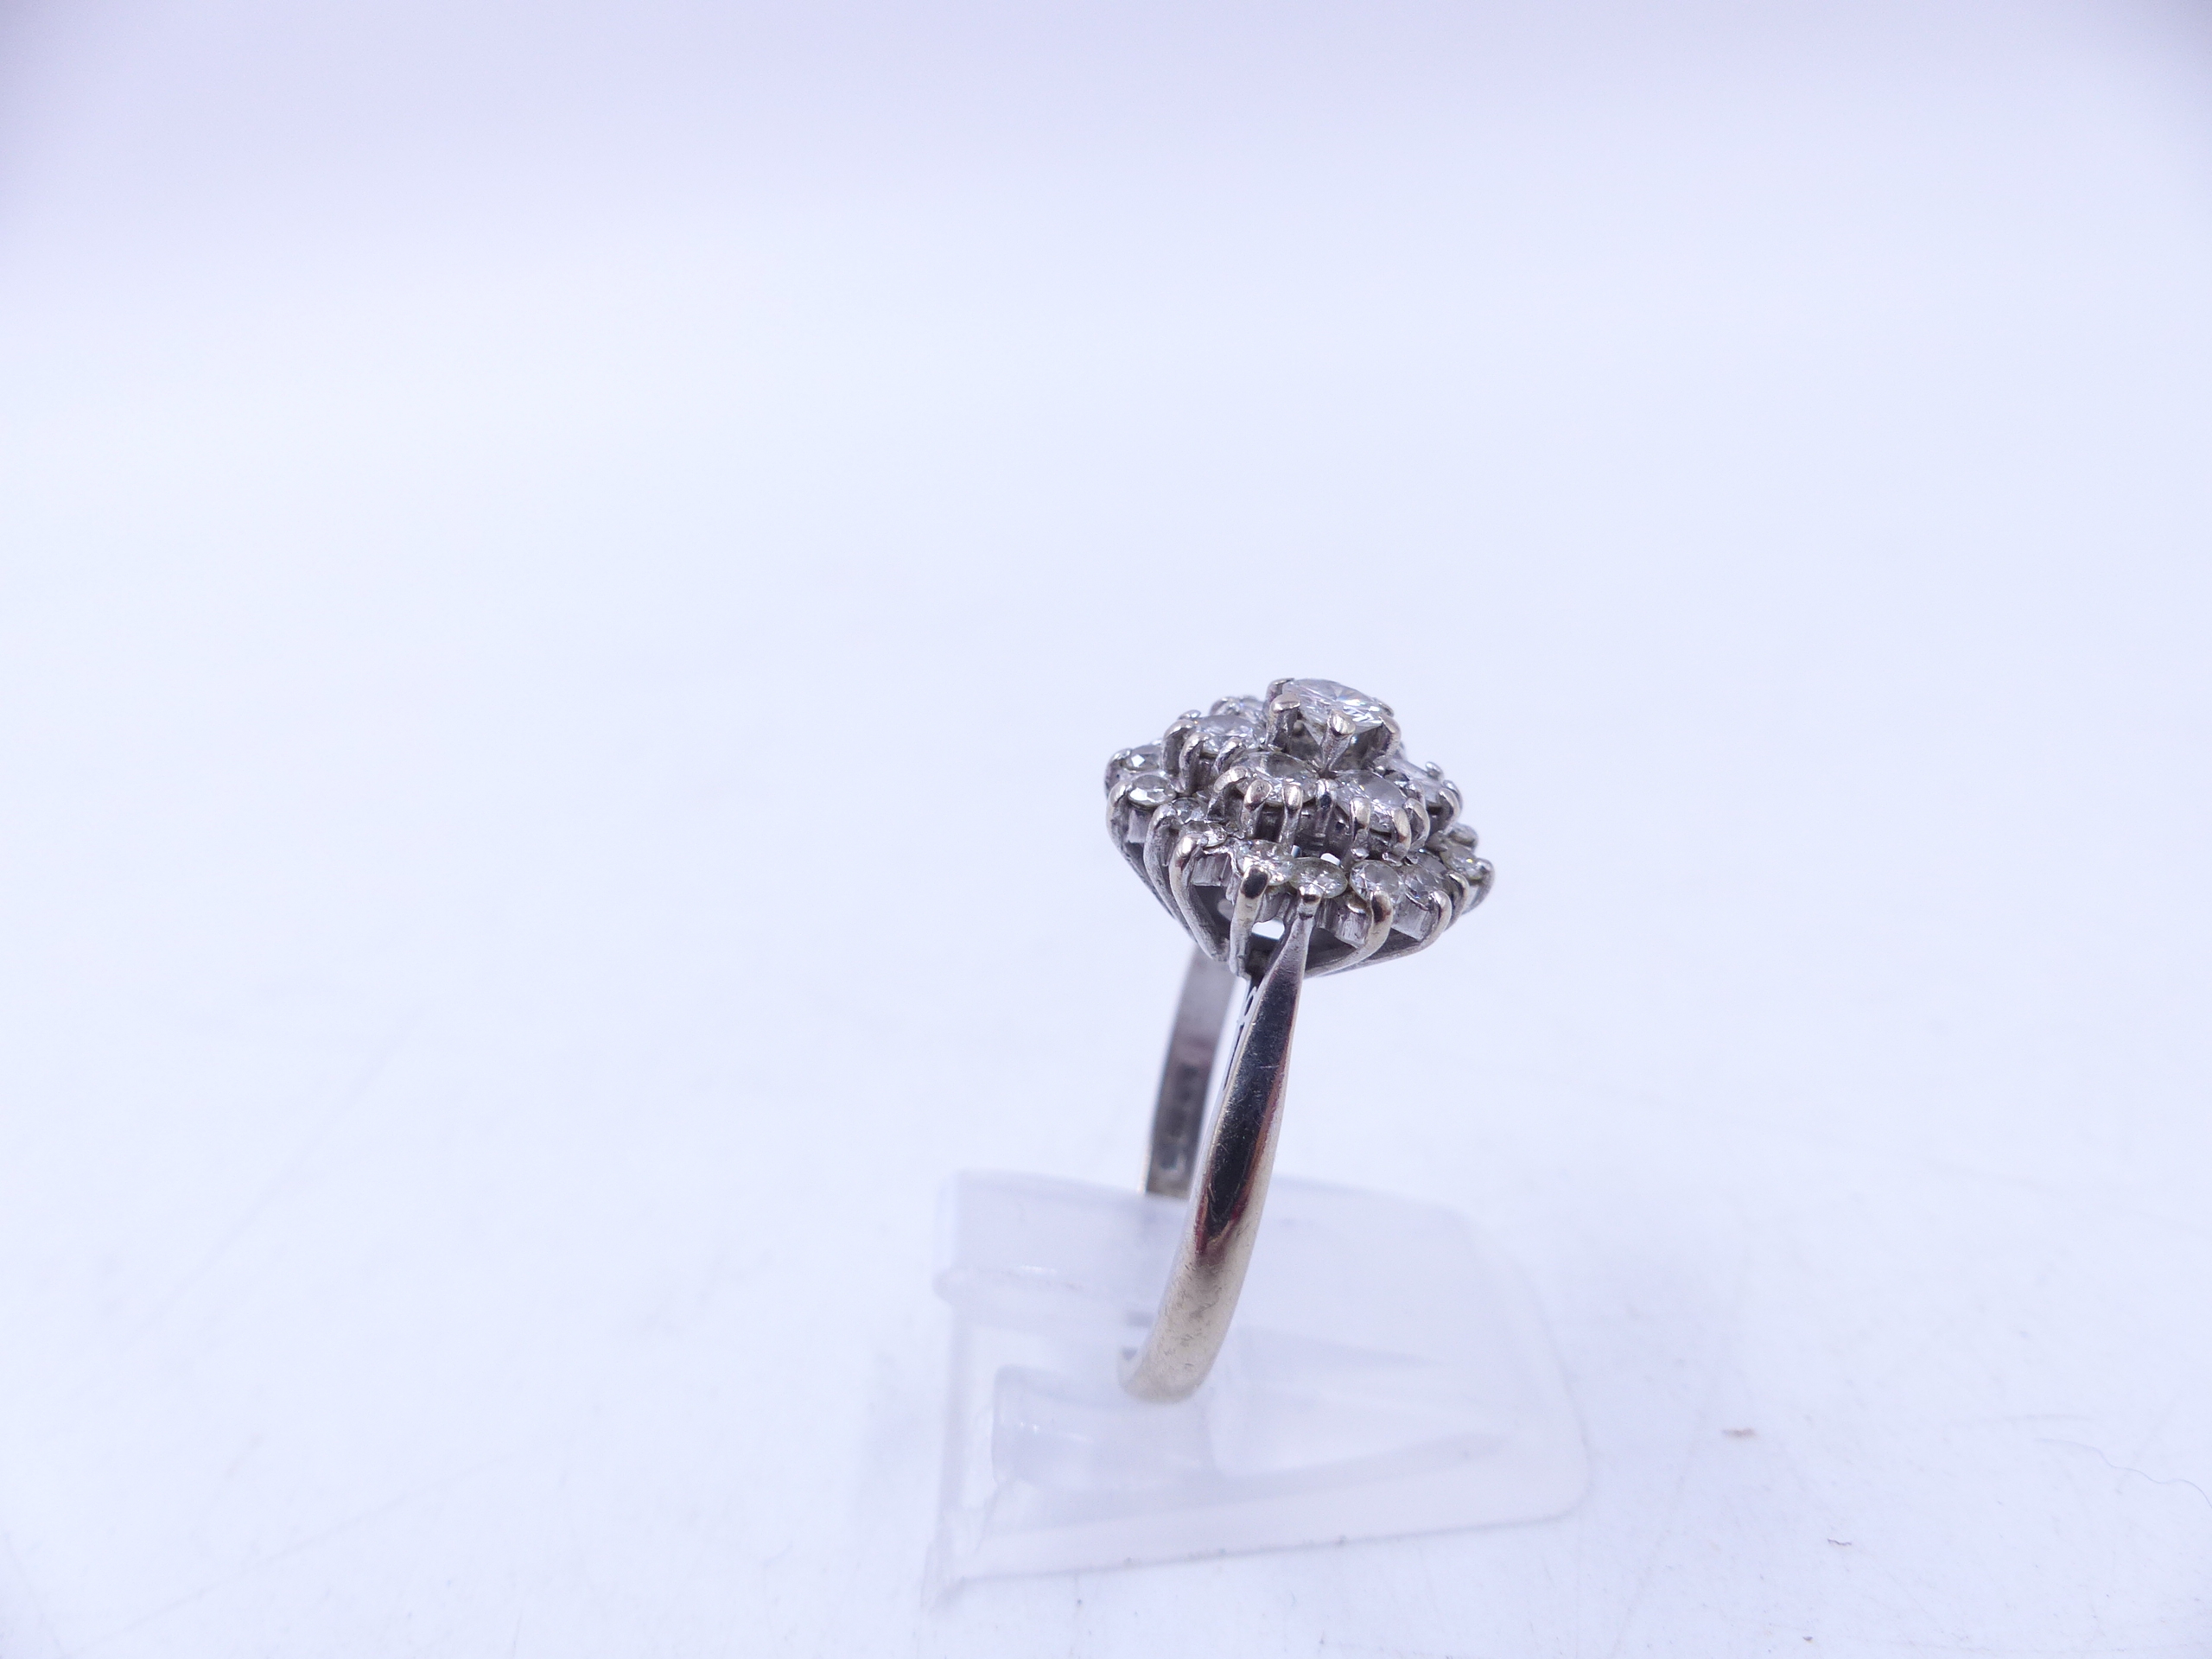 AN 18ct HALLMARKED WHITE GOLD DIAMOND DOUBLE CLUSTER RING. THE BRILLIANT CUT DIAMONDS ARE CLAW - Image 4 of 14